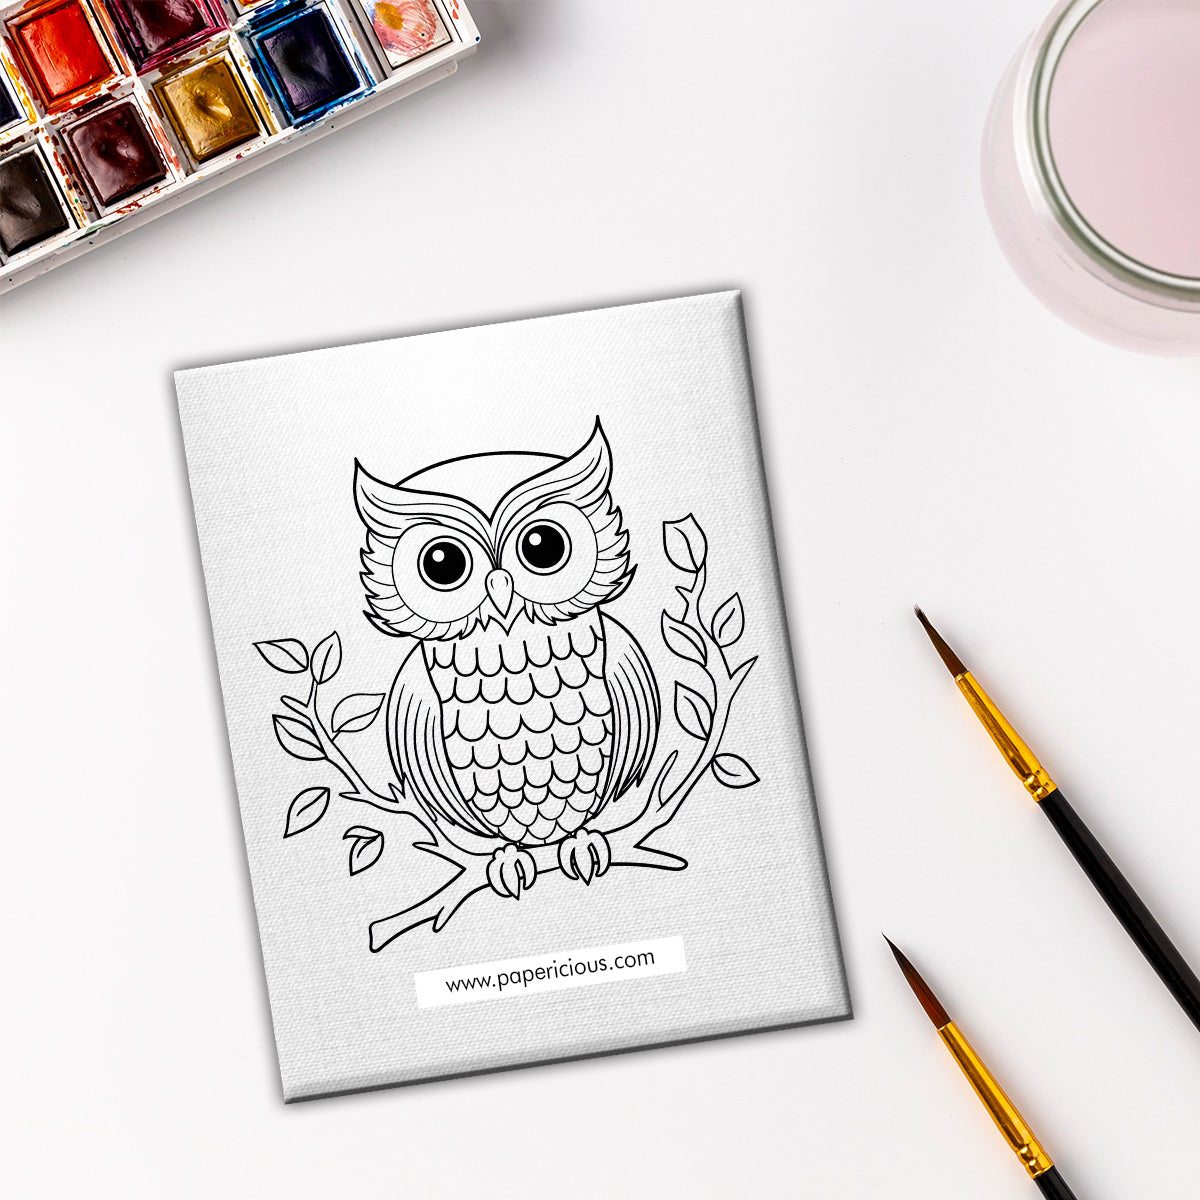 Pre Marked DIY Canvas - Owl Style 10